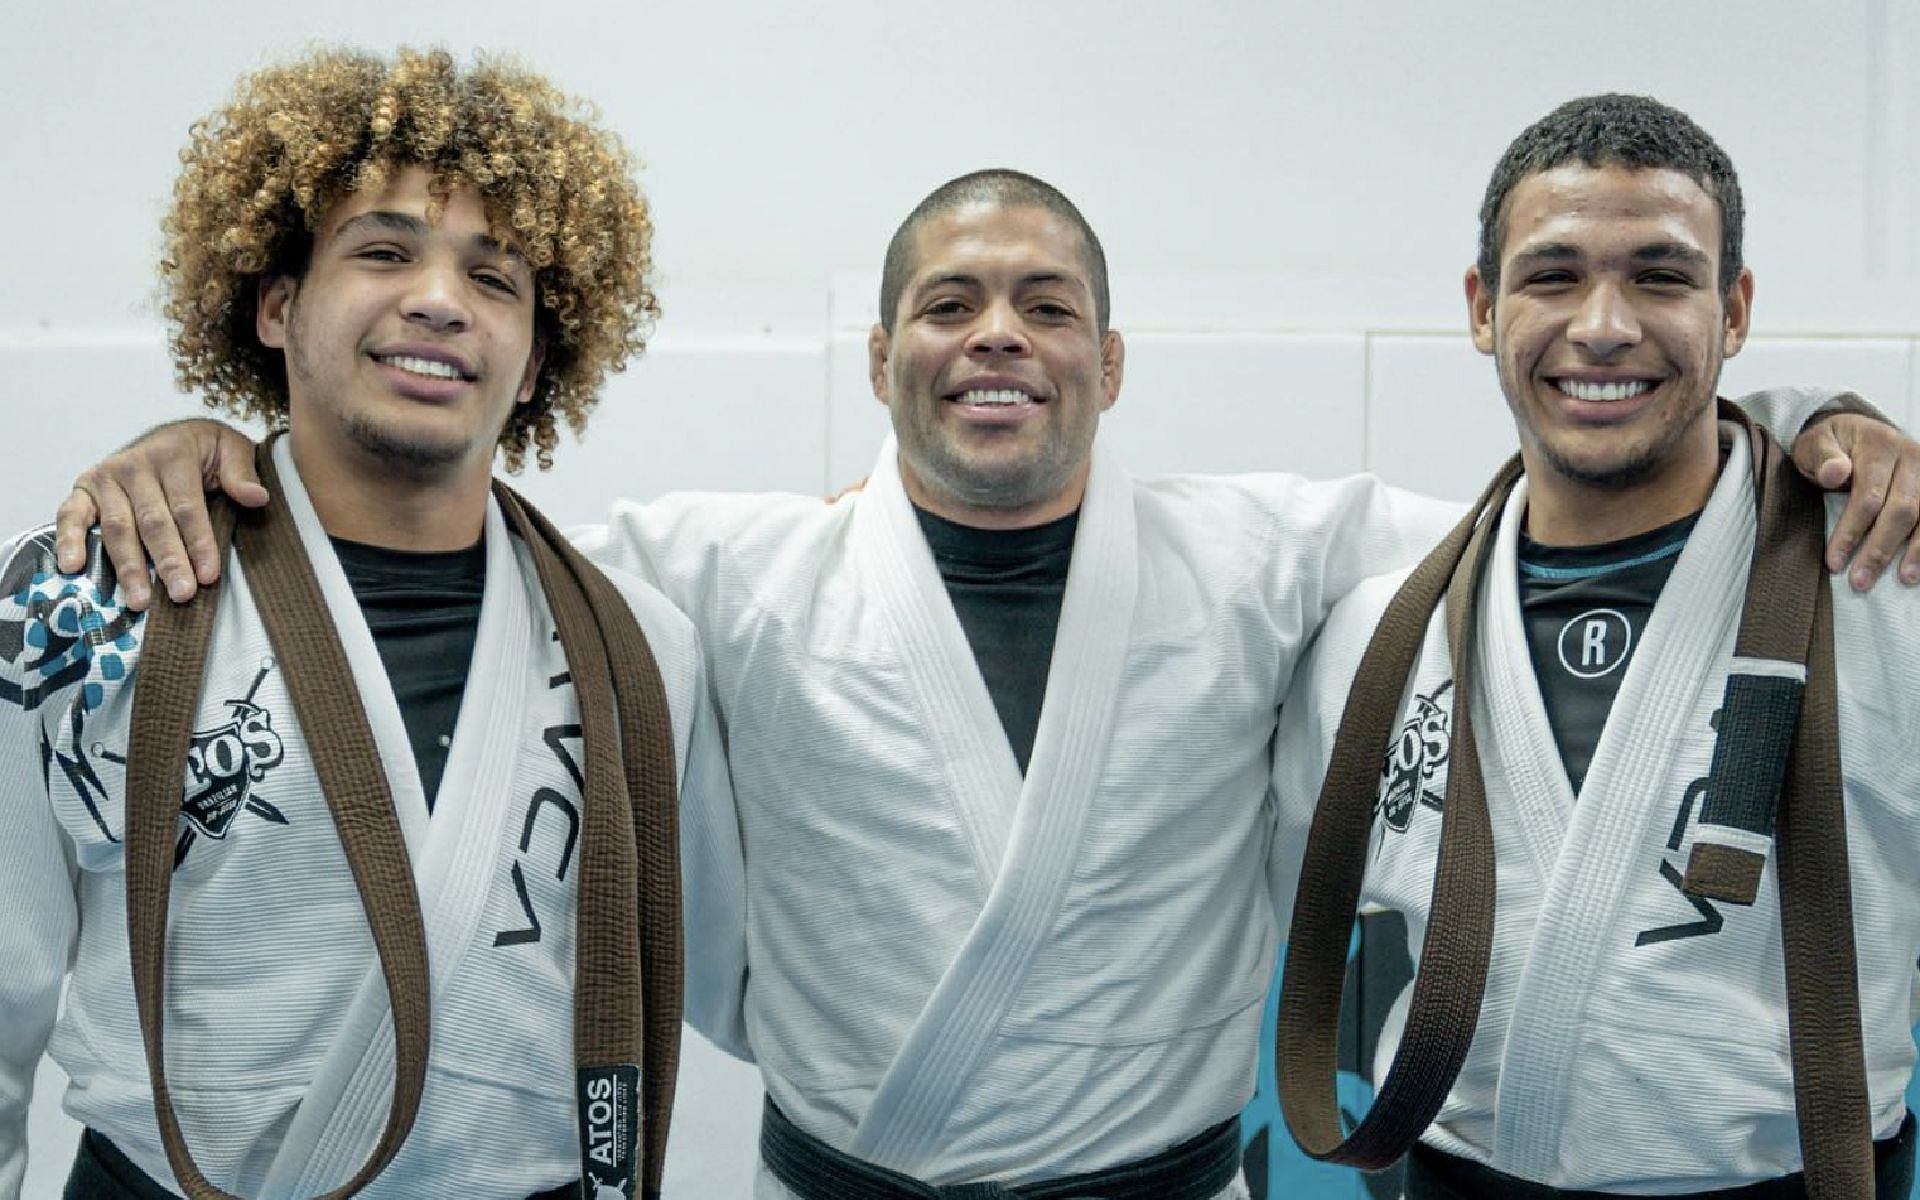 Twins Kade Ruotolo (left) and Tye Ruotolo (right) along with their mentor Andre Galvao (center). [Photo Andre Galvao Instagram]